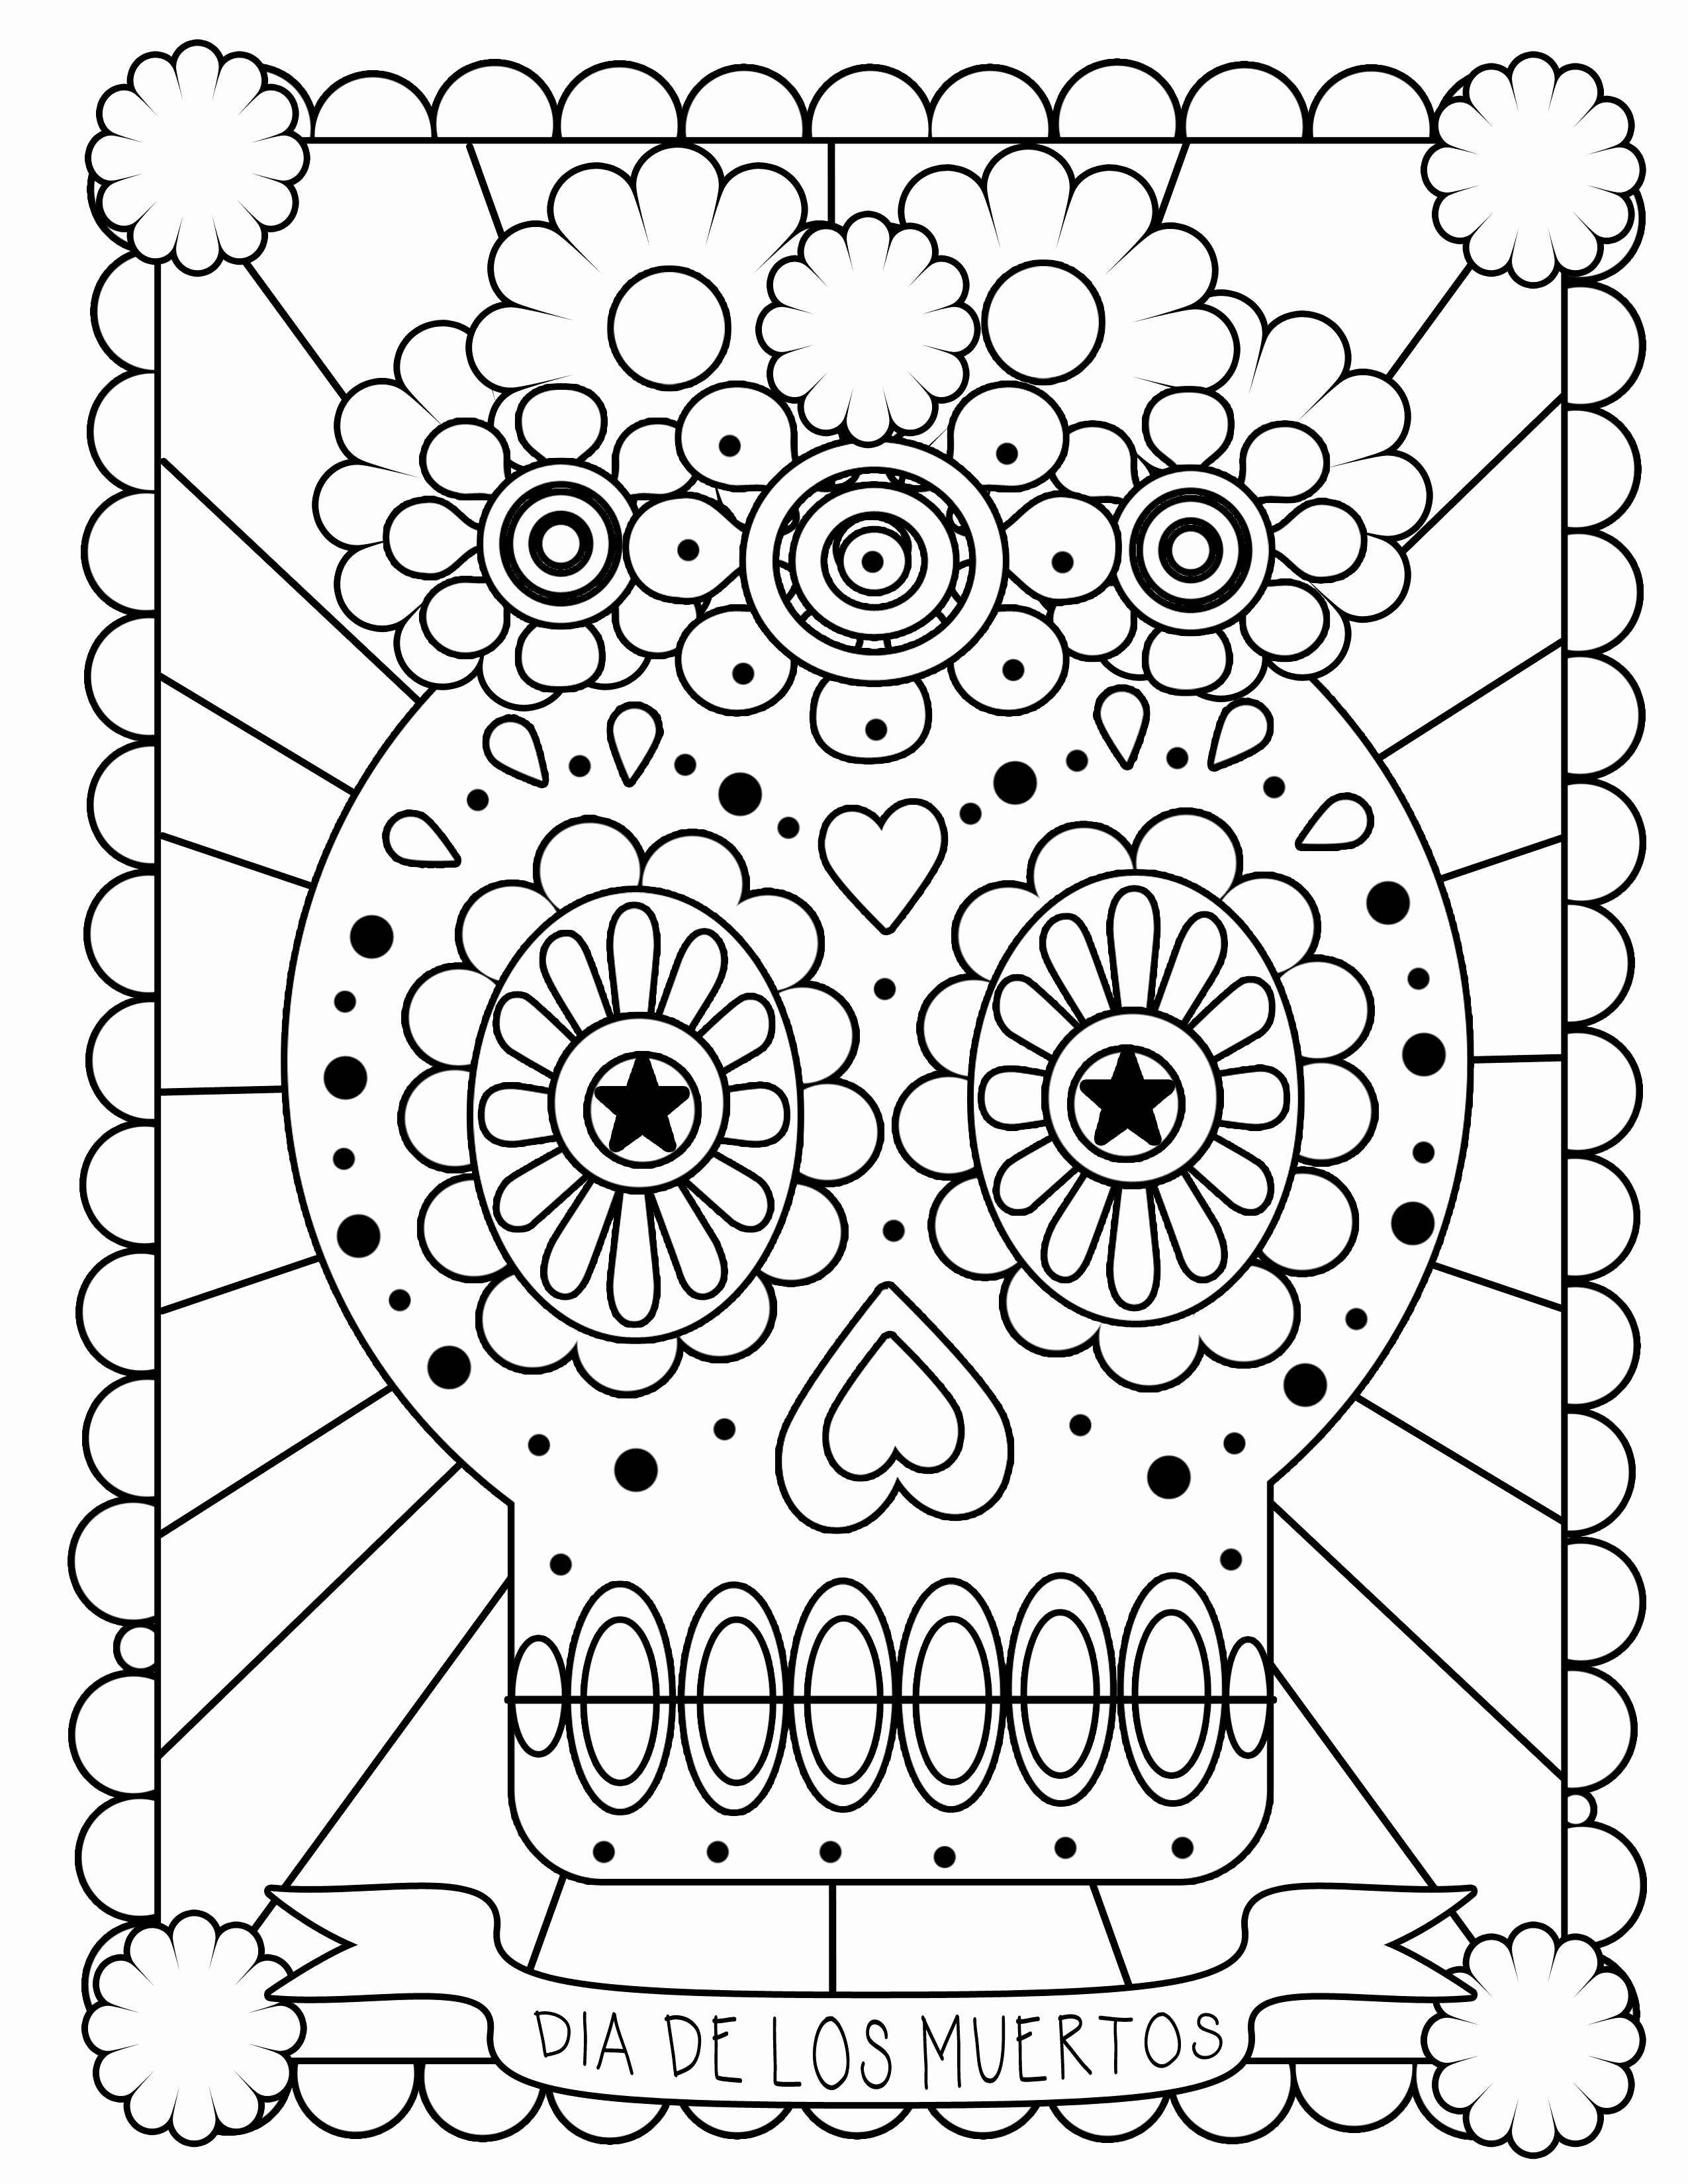 Dia De Los Muertos Worksheet New Free Printable Day Of the Dead Coloring Pages Best